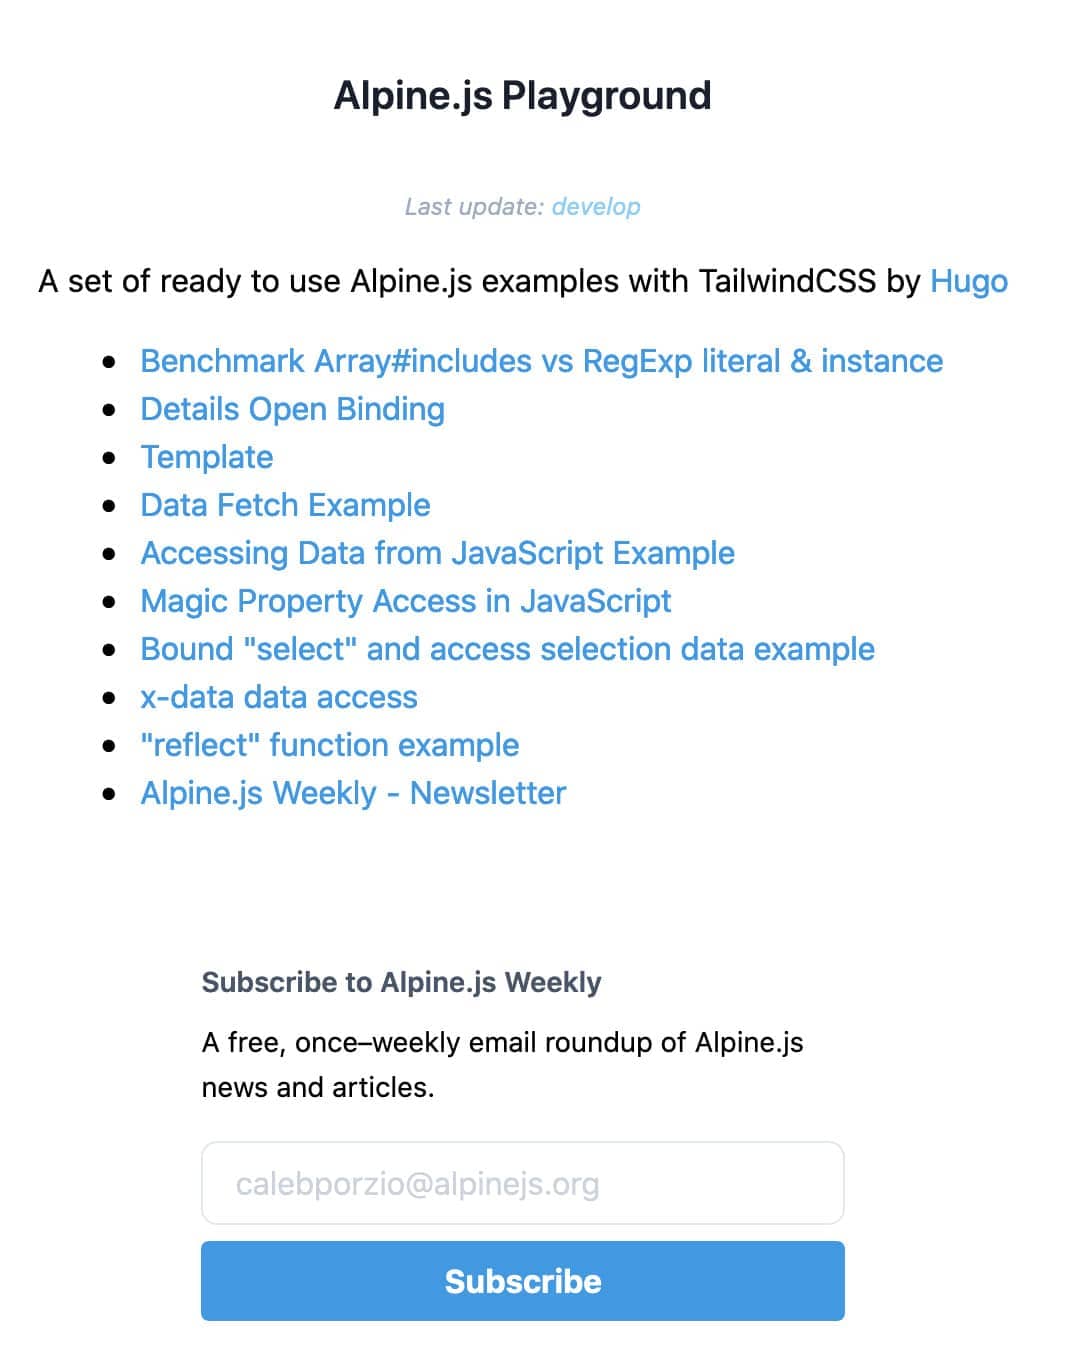 Alpine.js Playground homepage with commit information using Eleventy